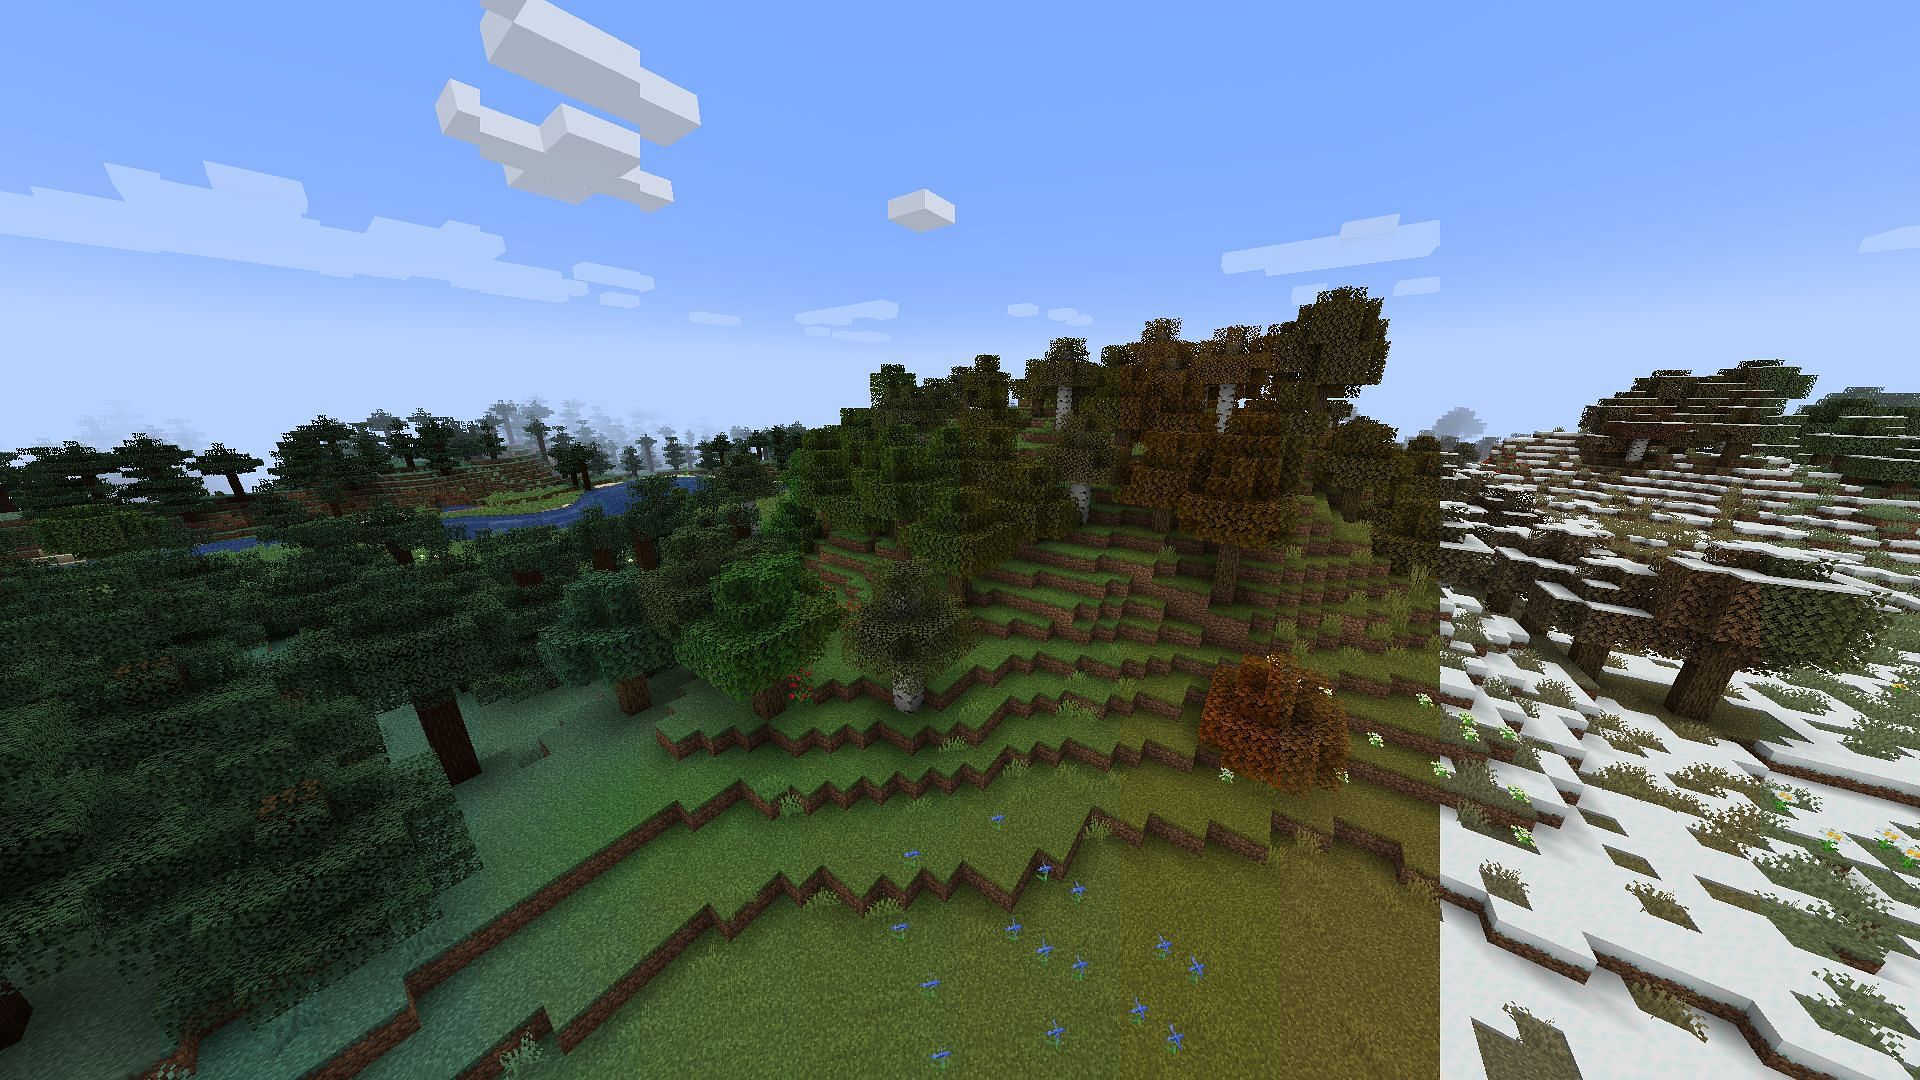 A seasonal change could make Minecraft&#039;s biomes even more exciting (Image via Adubbz/Modrinth)